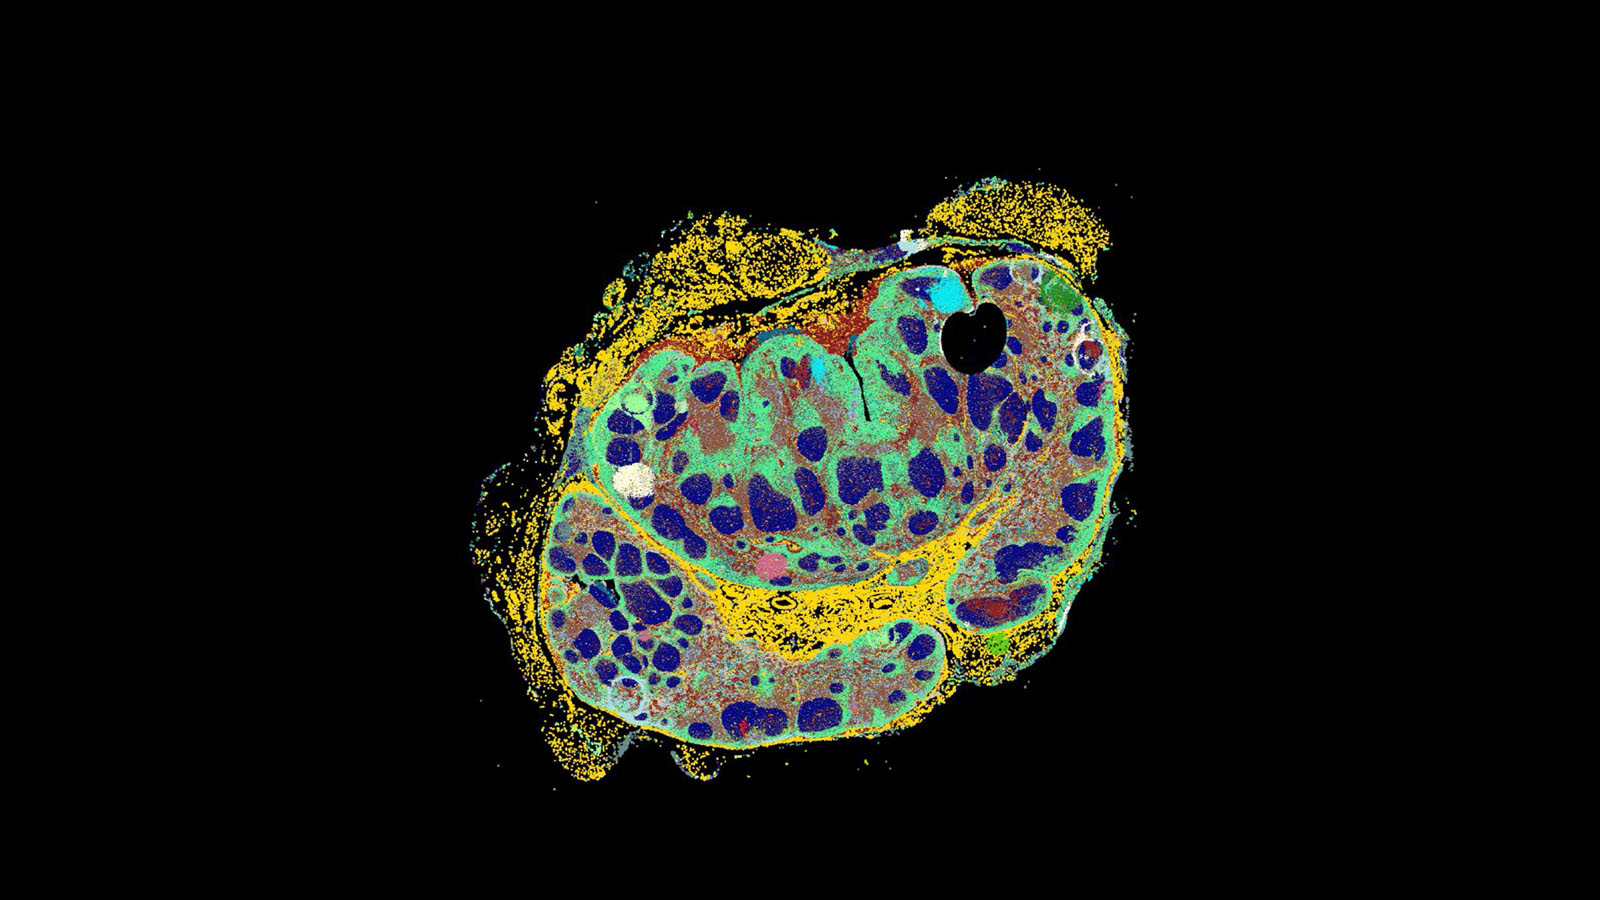 CODEX image of a lymph node from Archie Enninful at Rong Fan's lab at Yale